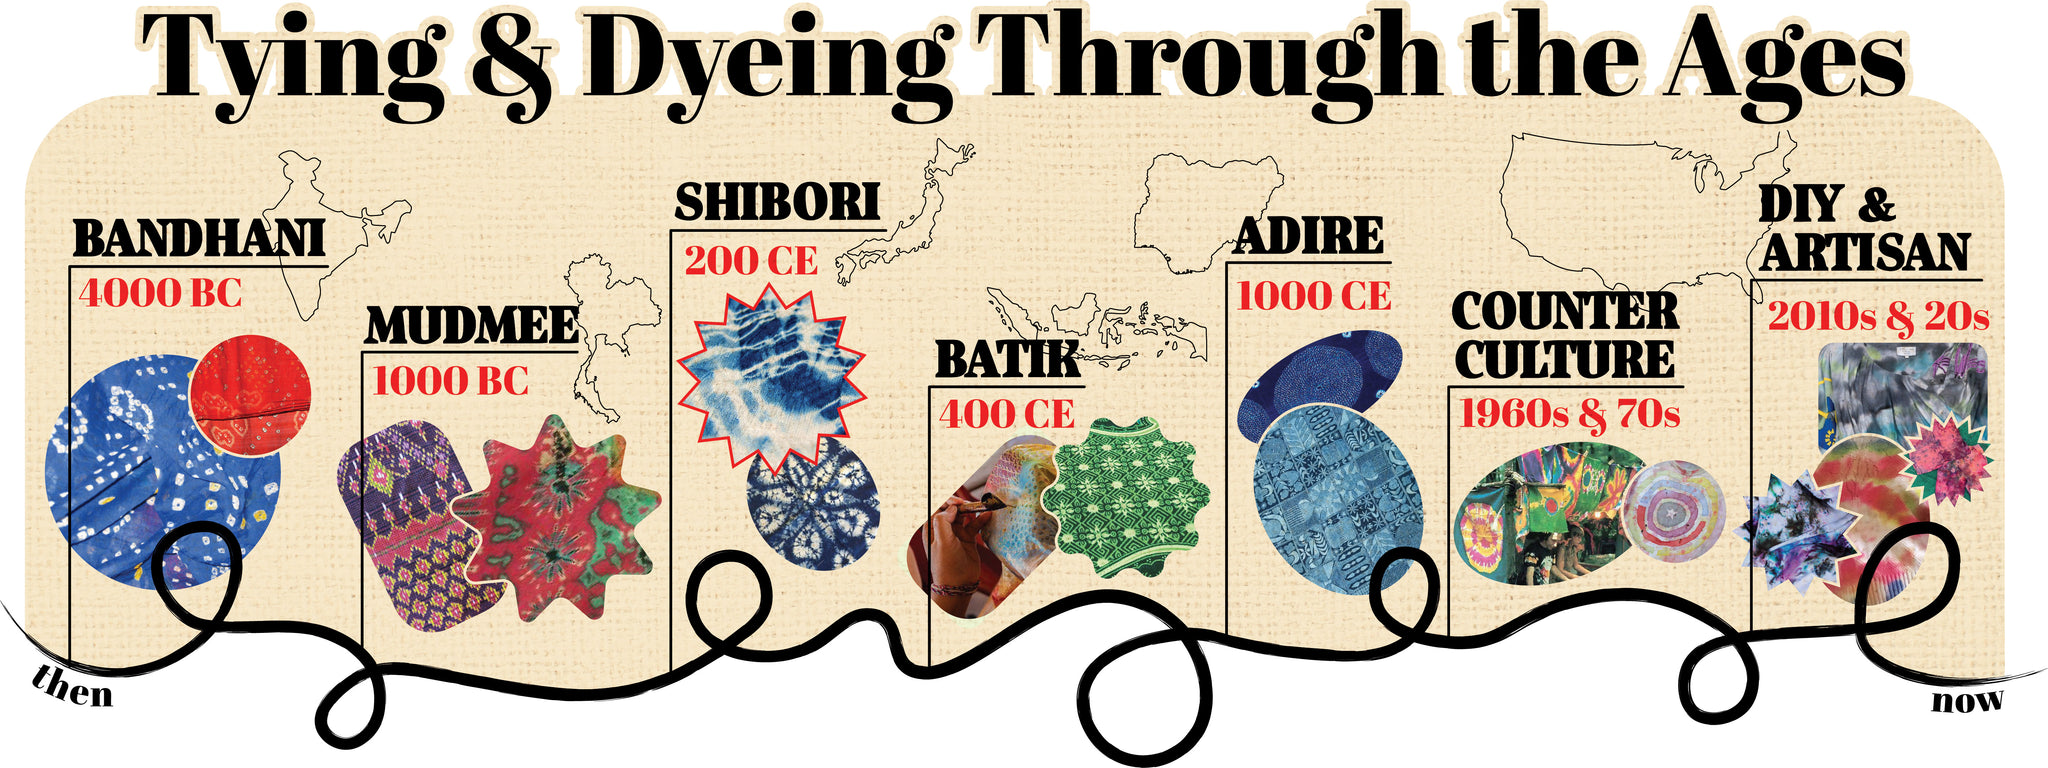 Through the ages timeline of fabric dyeing featuring bandhani, batik, shibori, mudmee, adire, 60s and contemporary tie dye styles